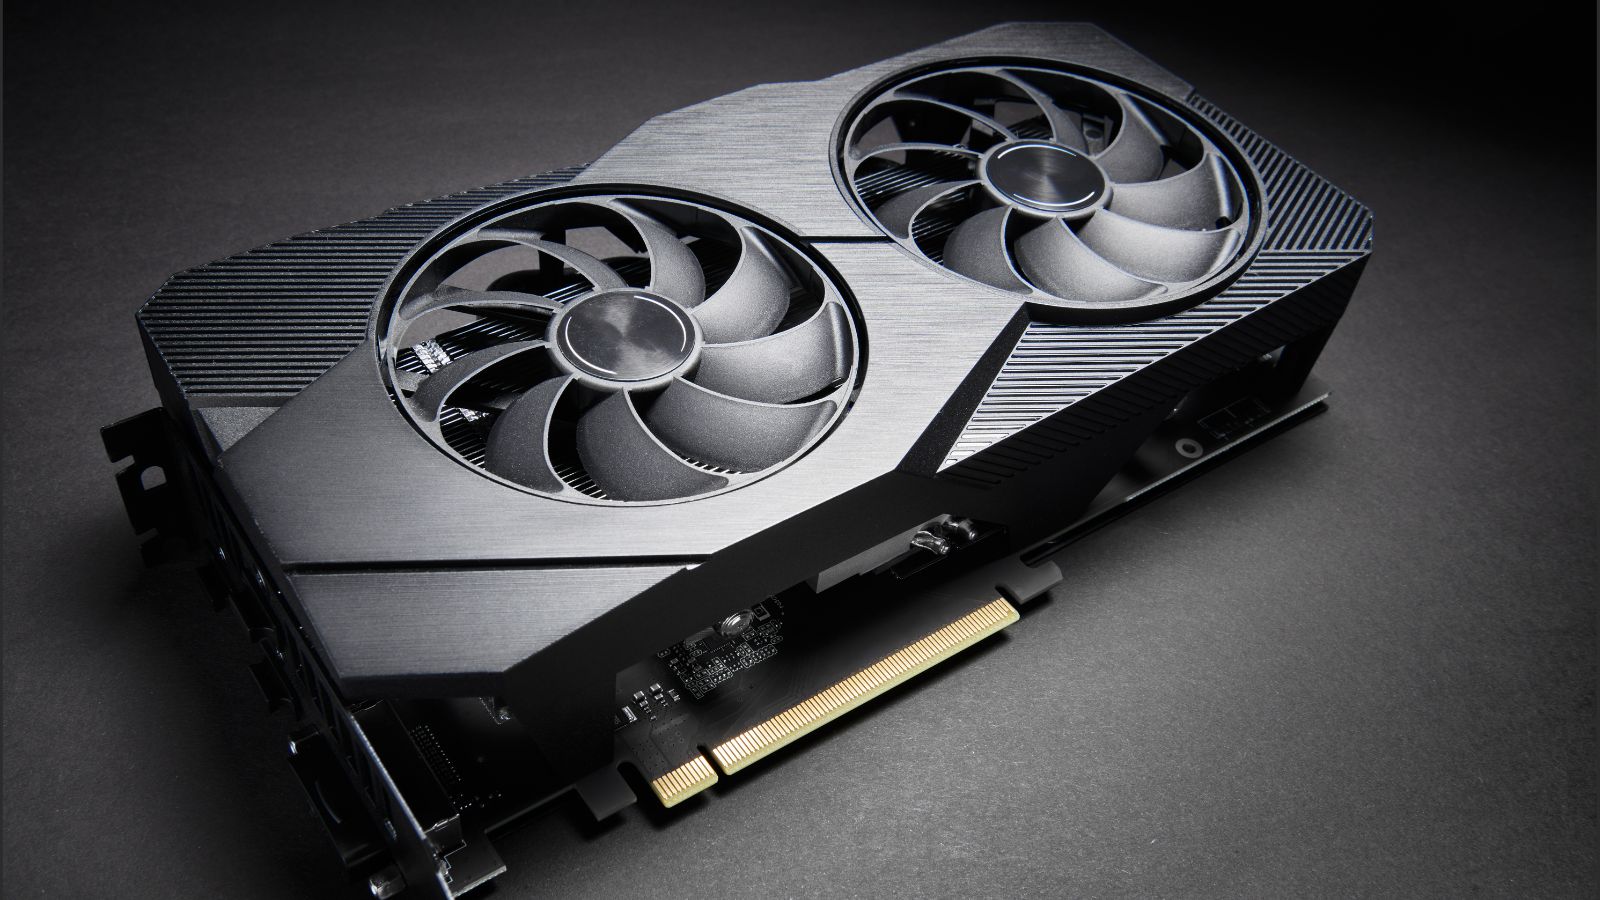 Nvidia's Newest Graphics Card, the GeForce GT 730, is Super Affordable